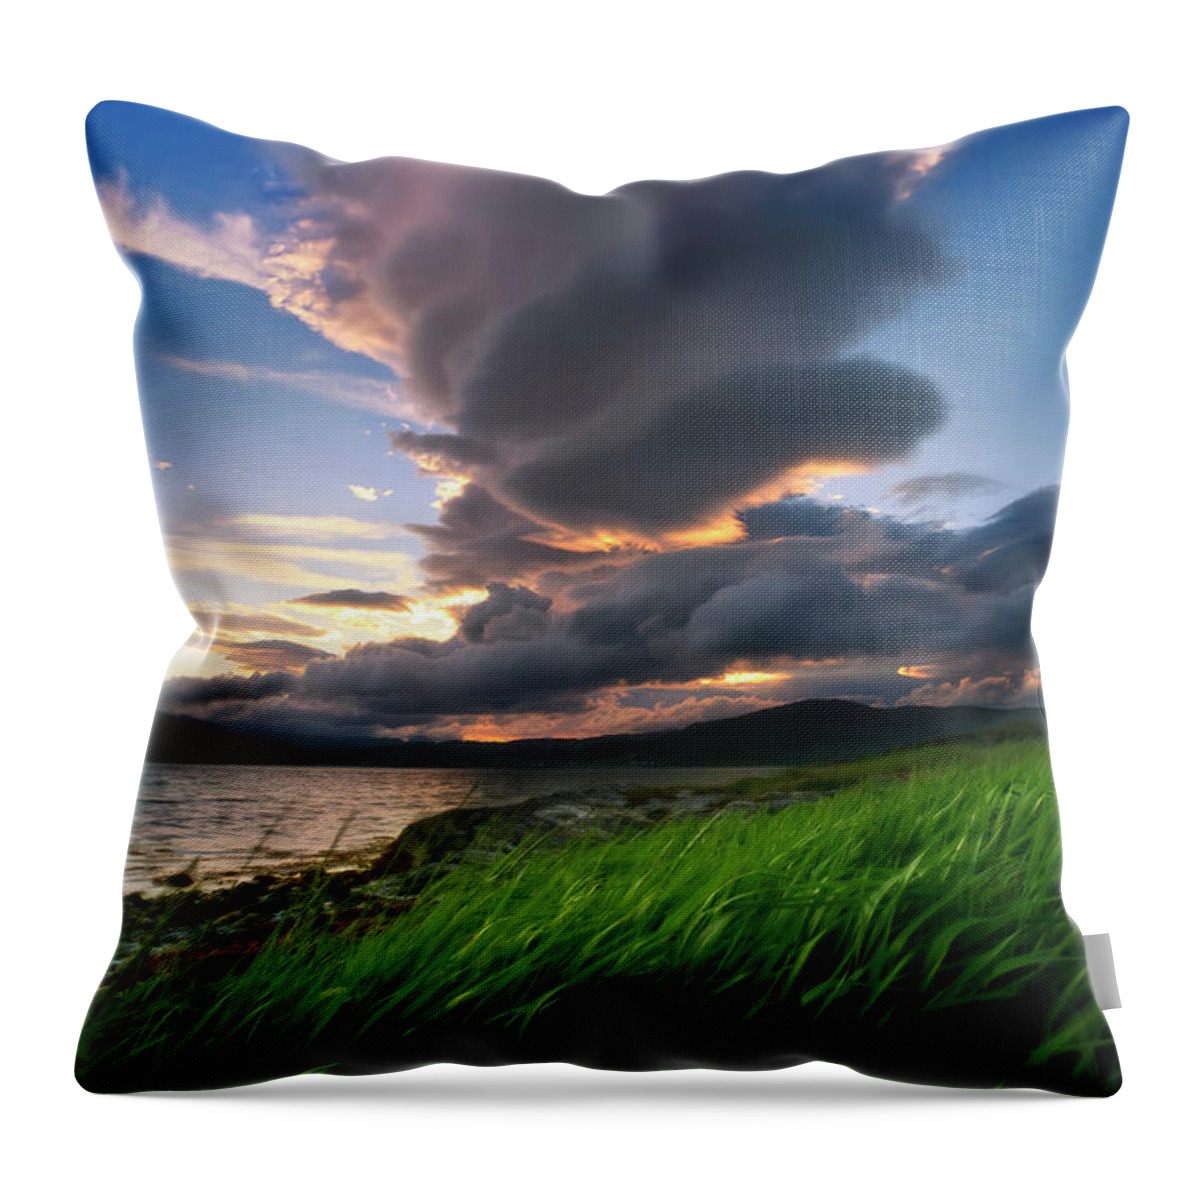 Scenics Throw Pillow featuring the photograph A Giant Stacked Lenticular Cloud Over by Stocktrek Images/arild Heitmann